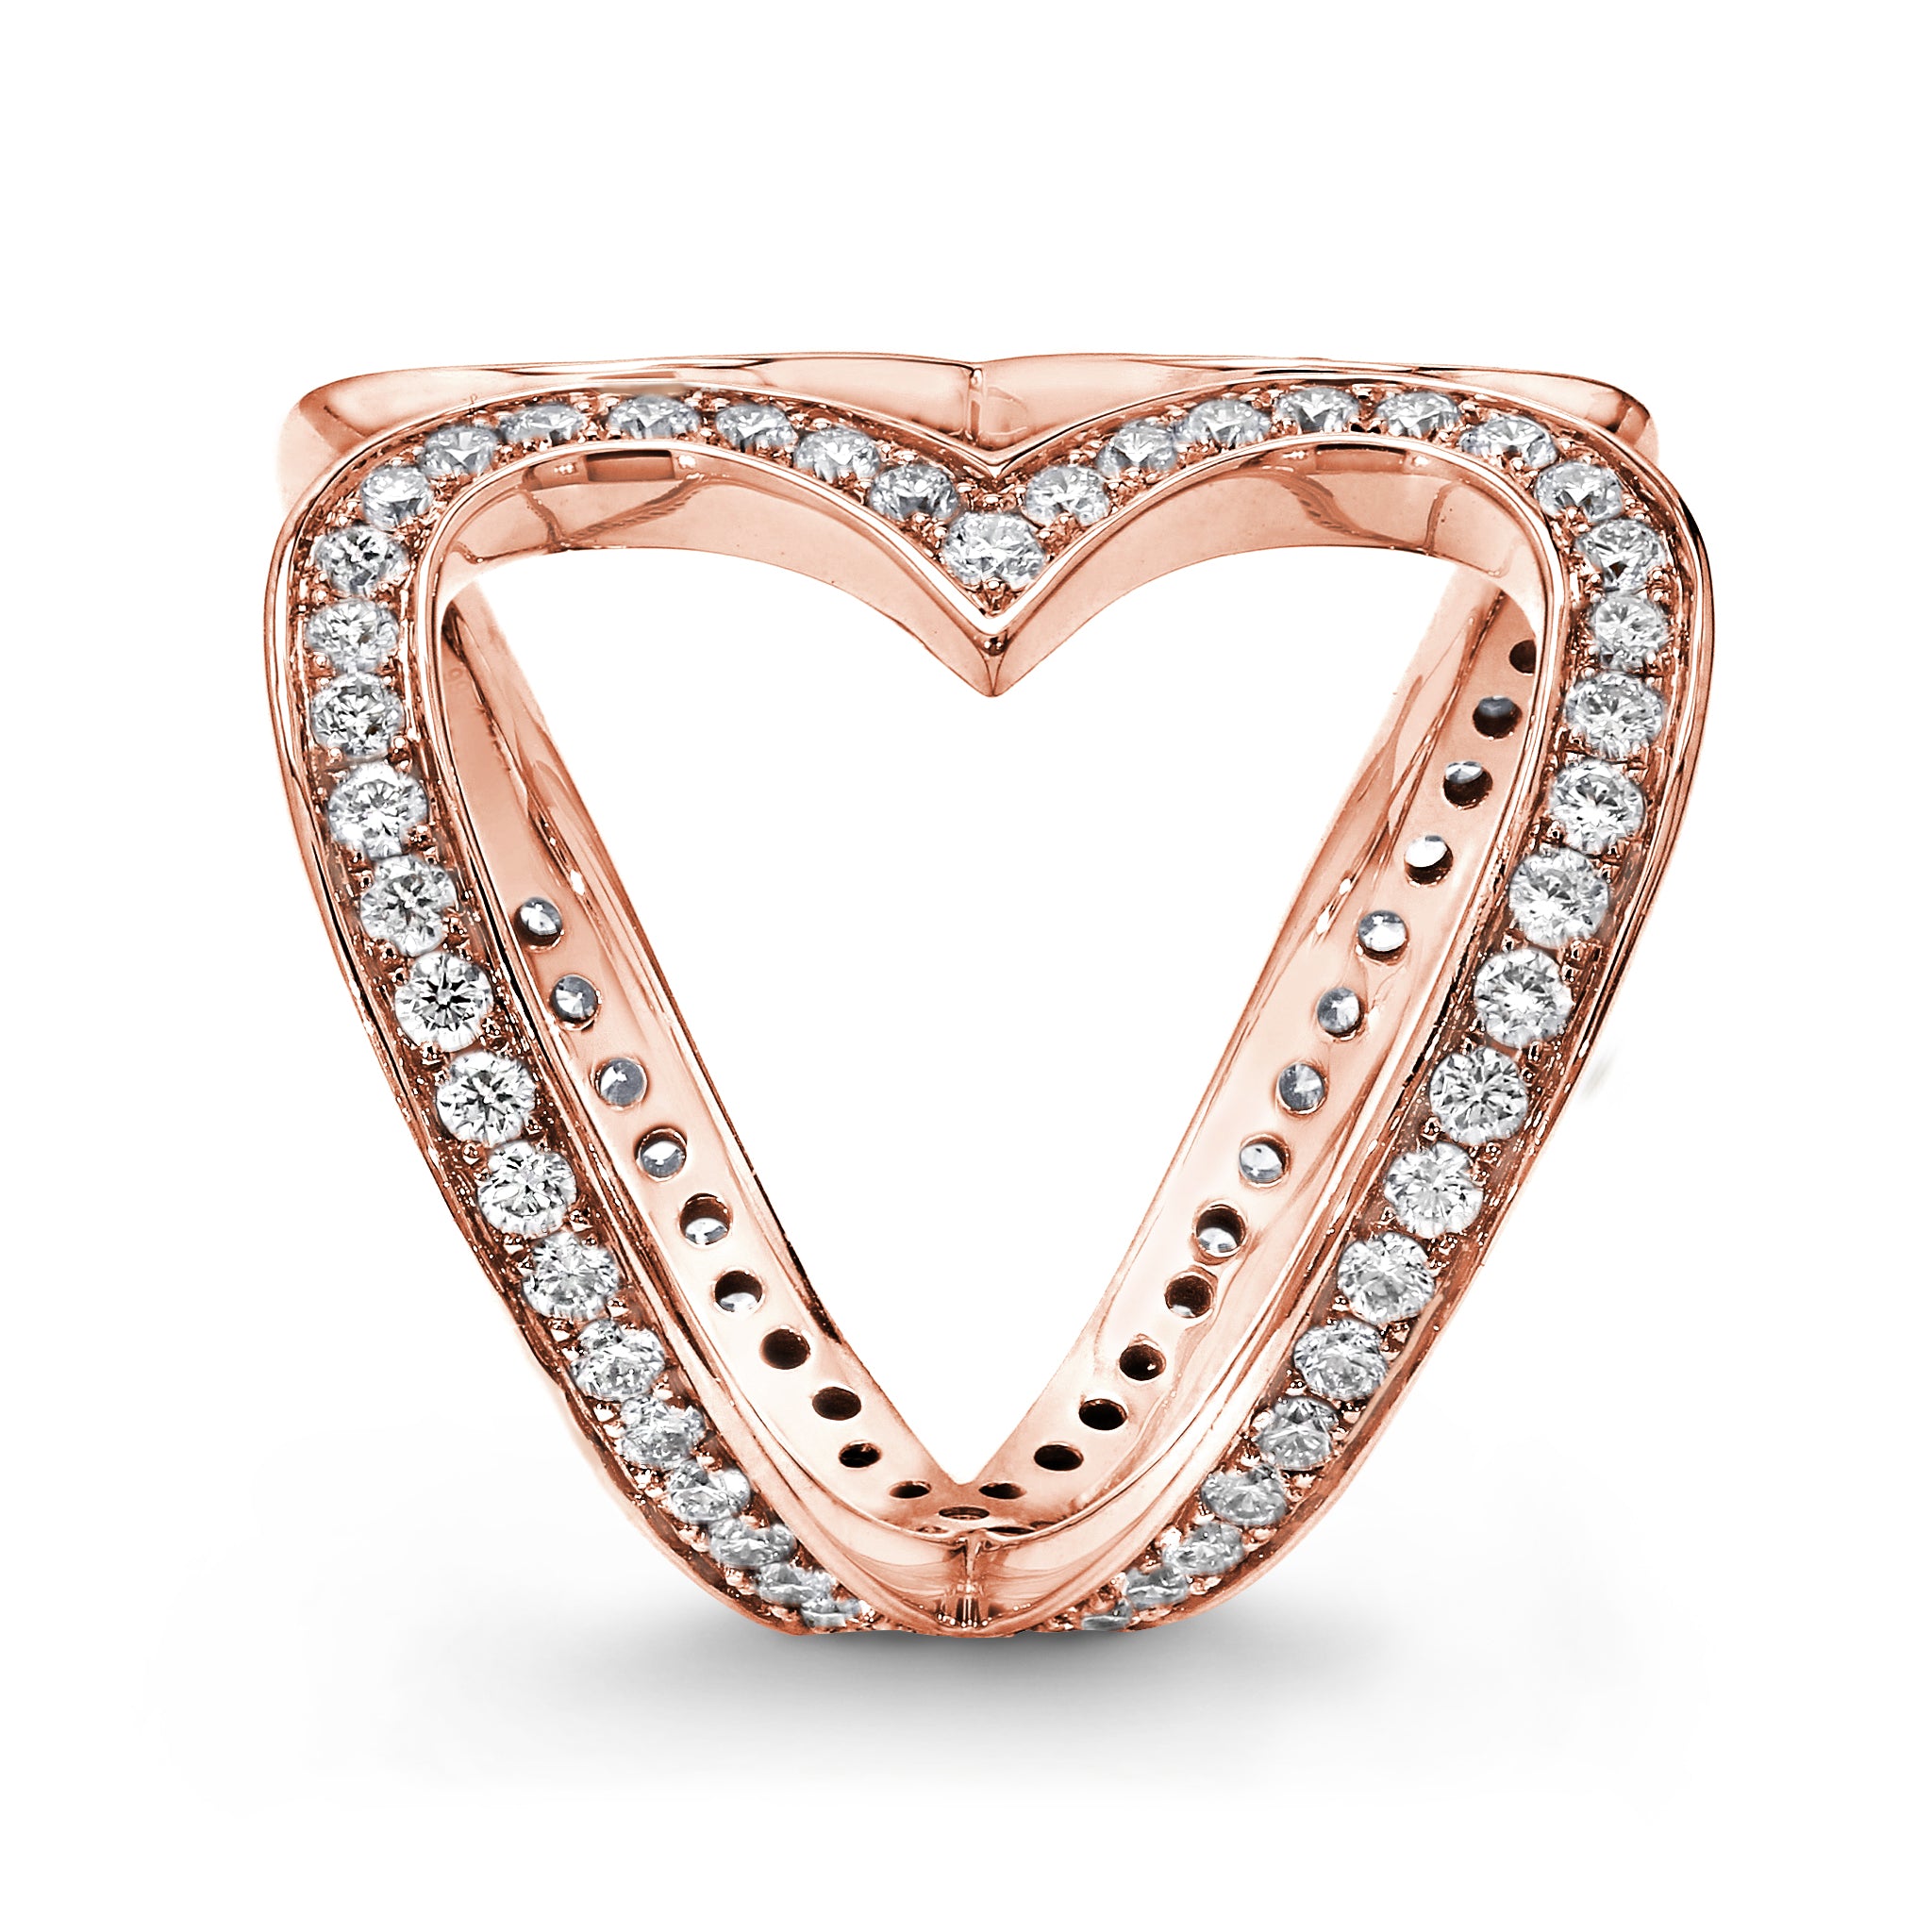 Shimansky - Two Hearts Diamond Statement Ring 1.70ct crafted in 18K Rose Gold